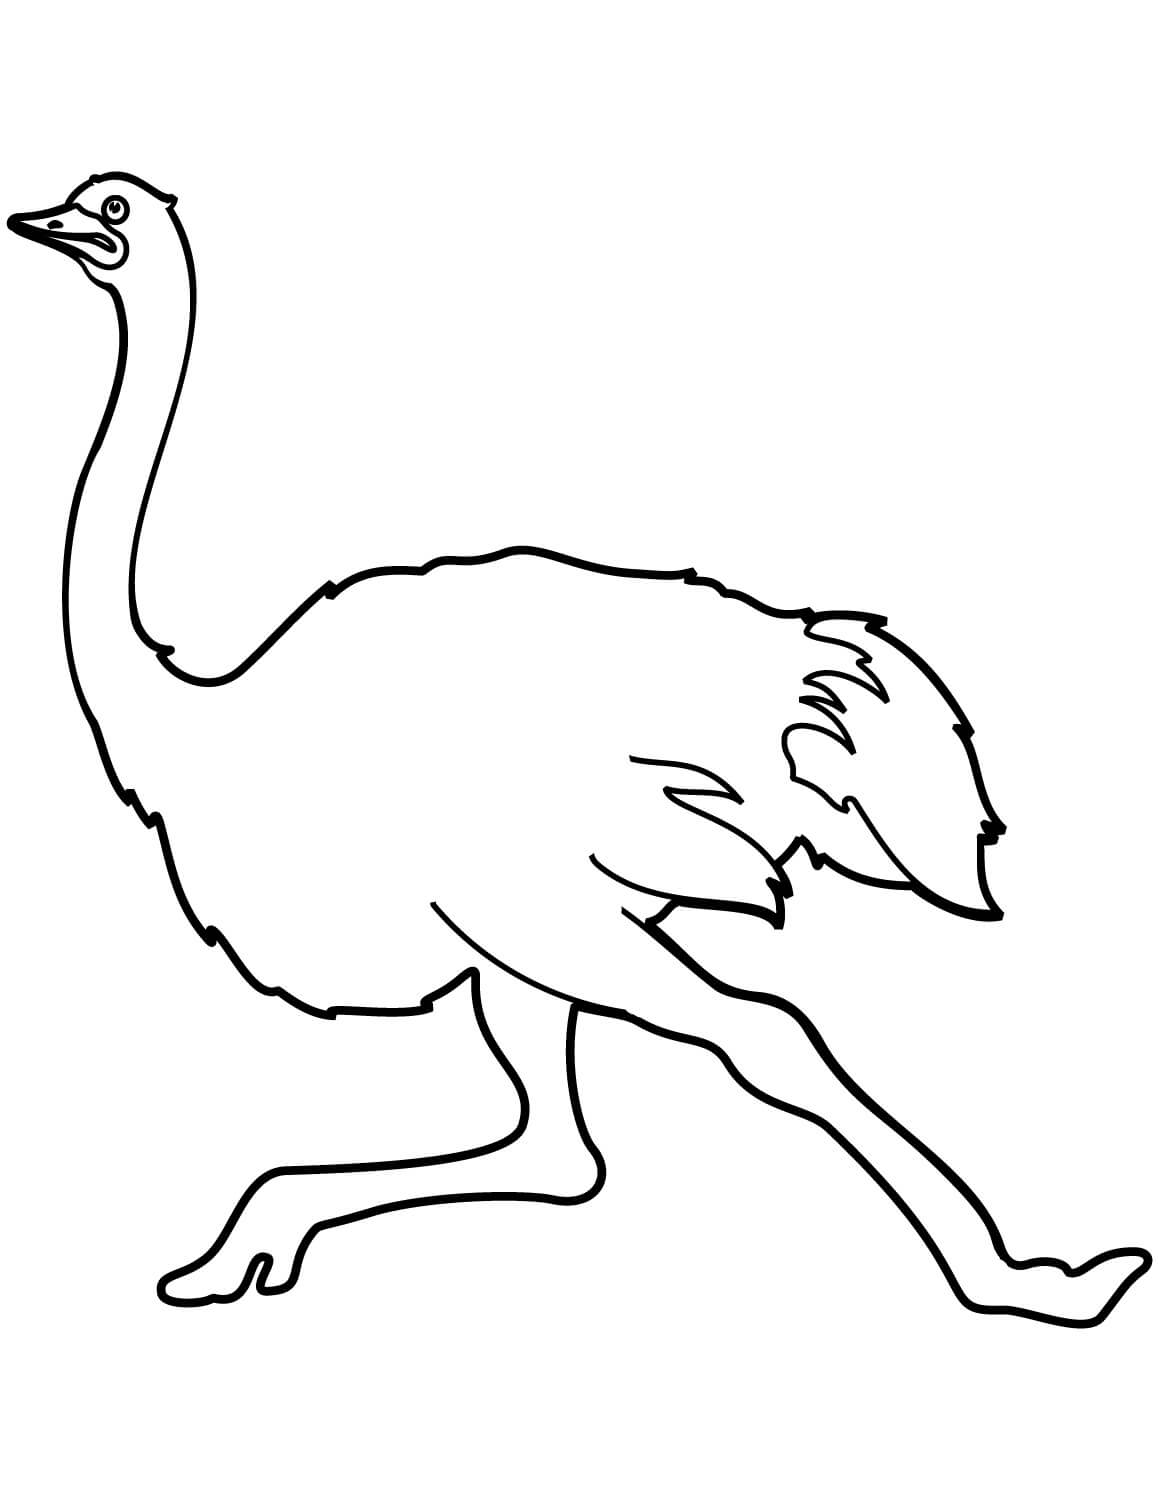 Ostrich with Eggs Coloring Page - Free Printable Coloring Pages for Kids